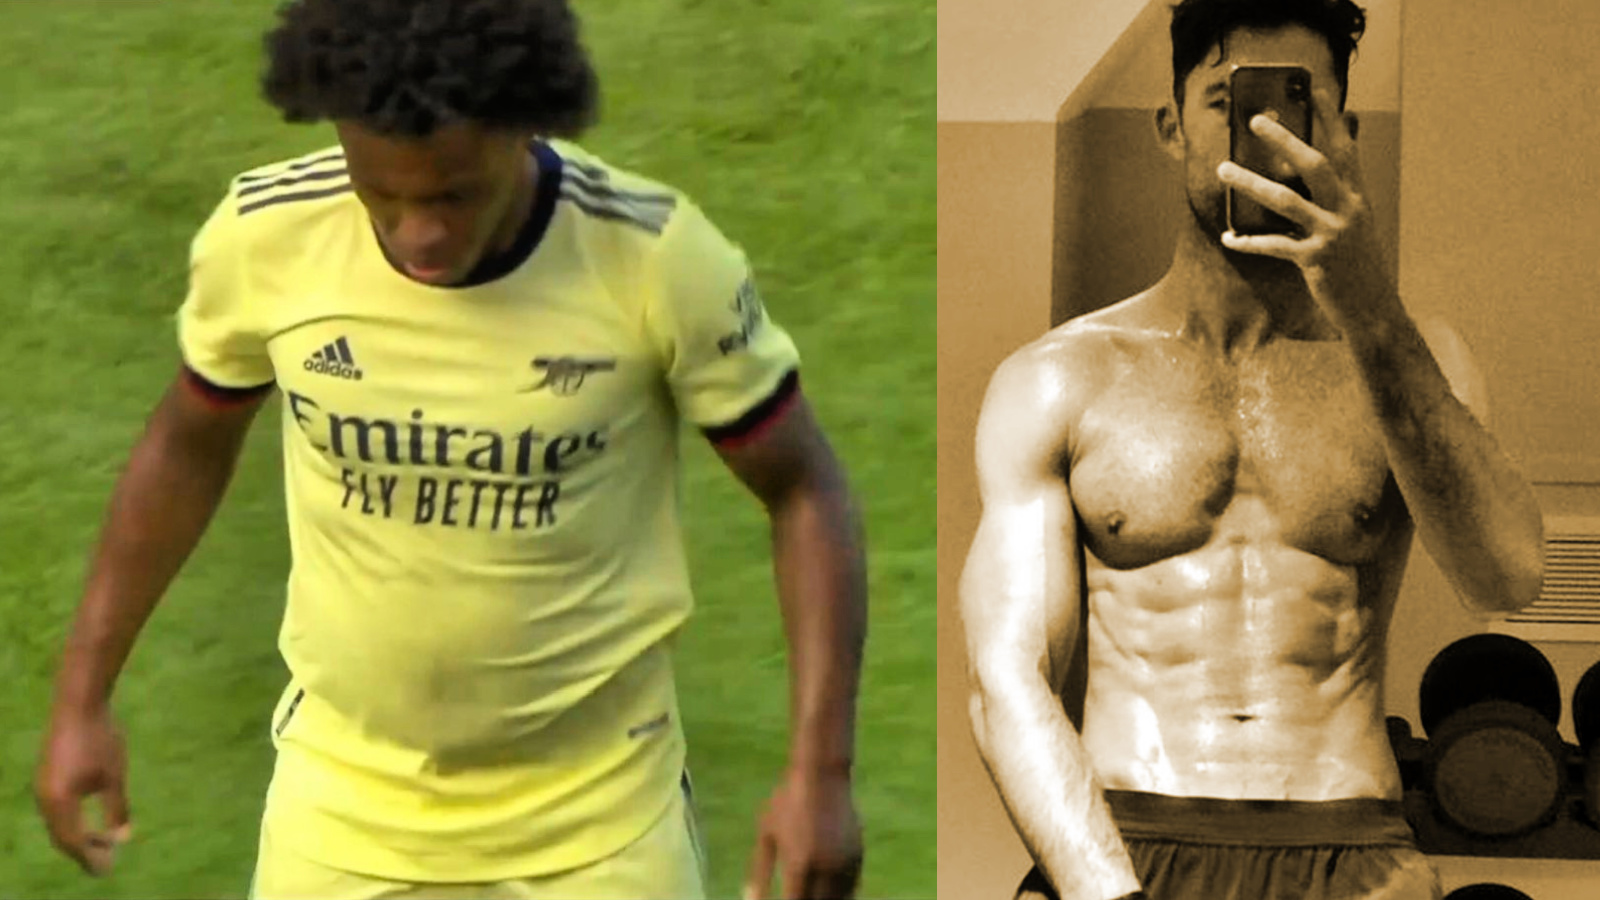 Photo – Comparing Willian and Gary Cahill’s pre-season physique